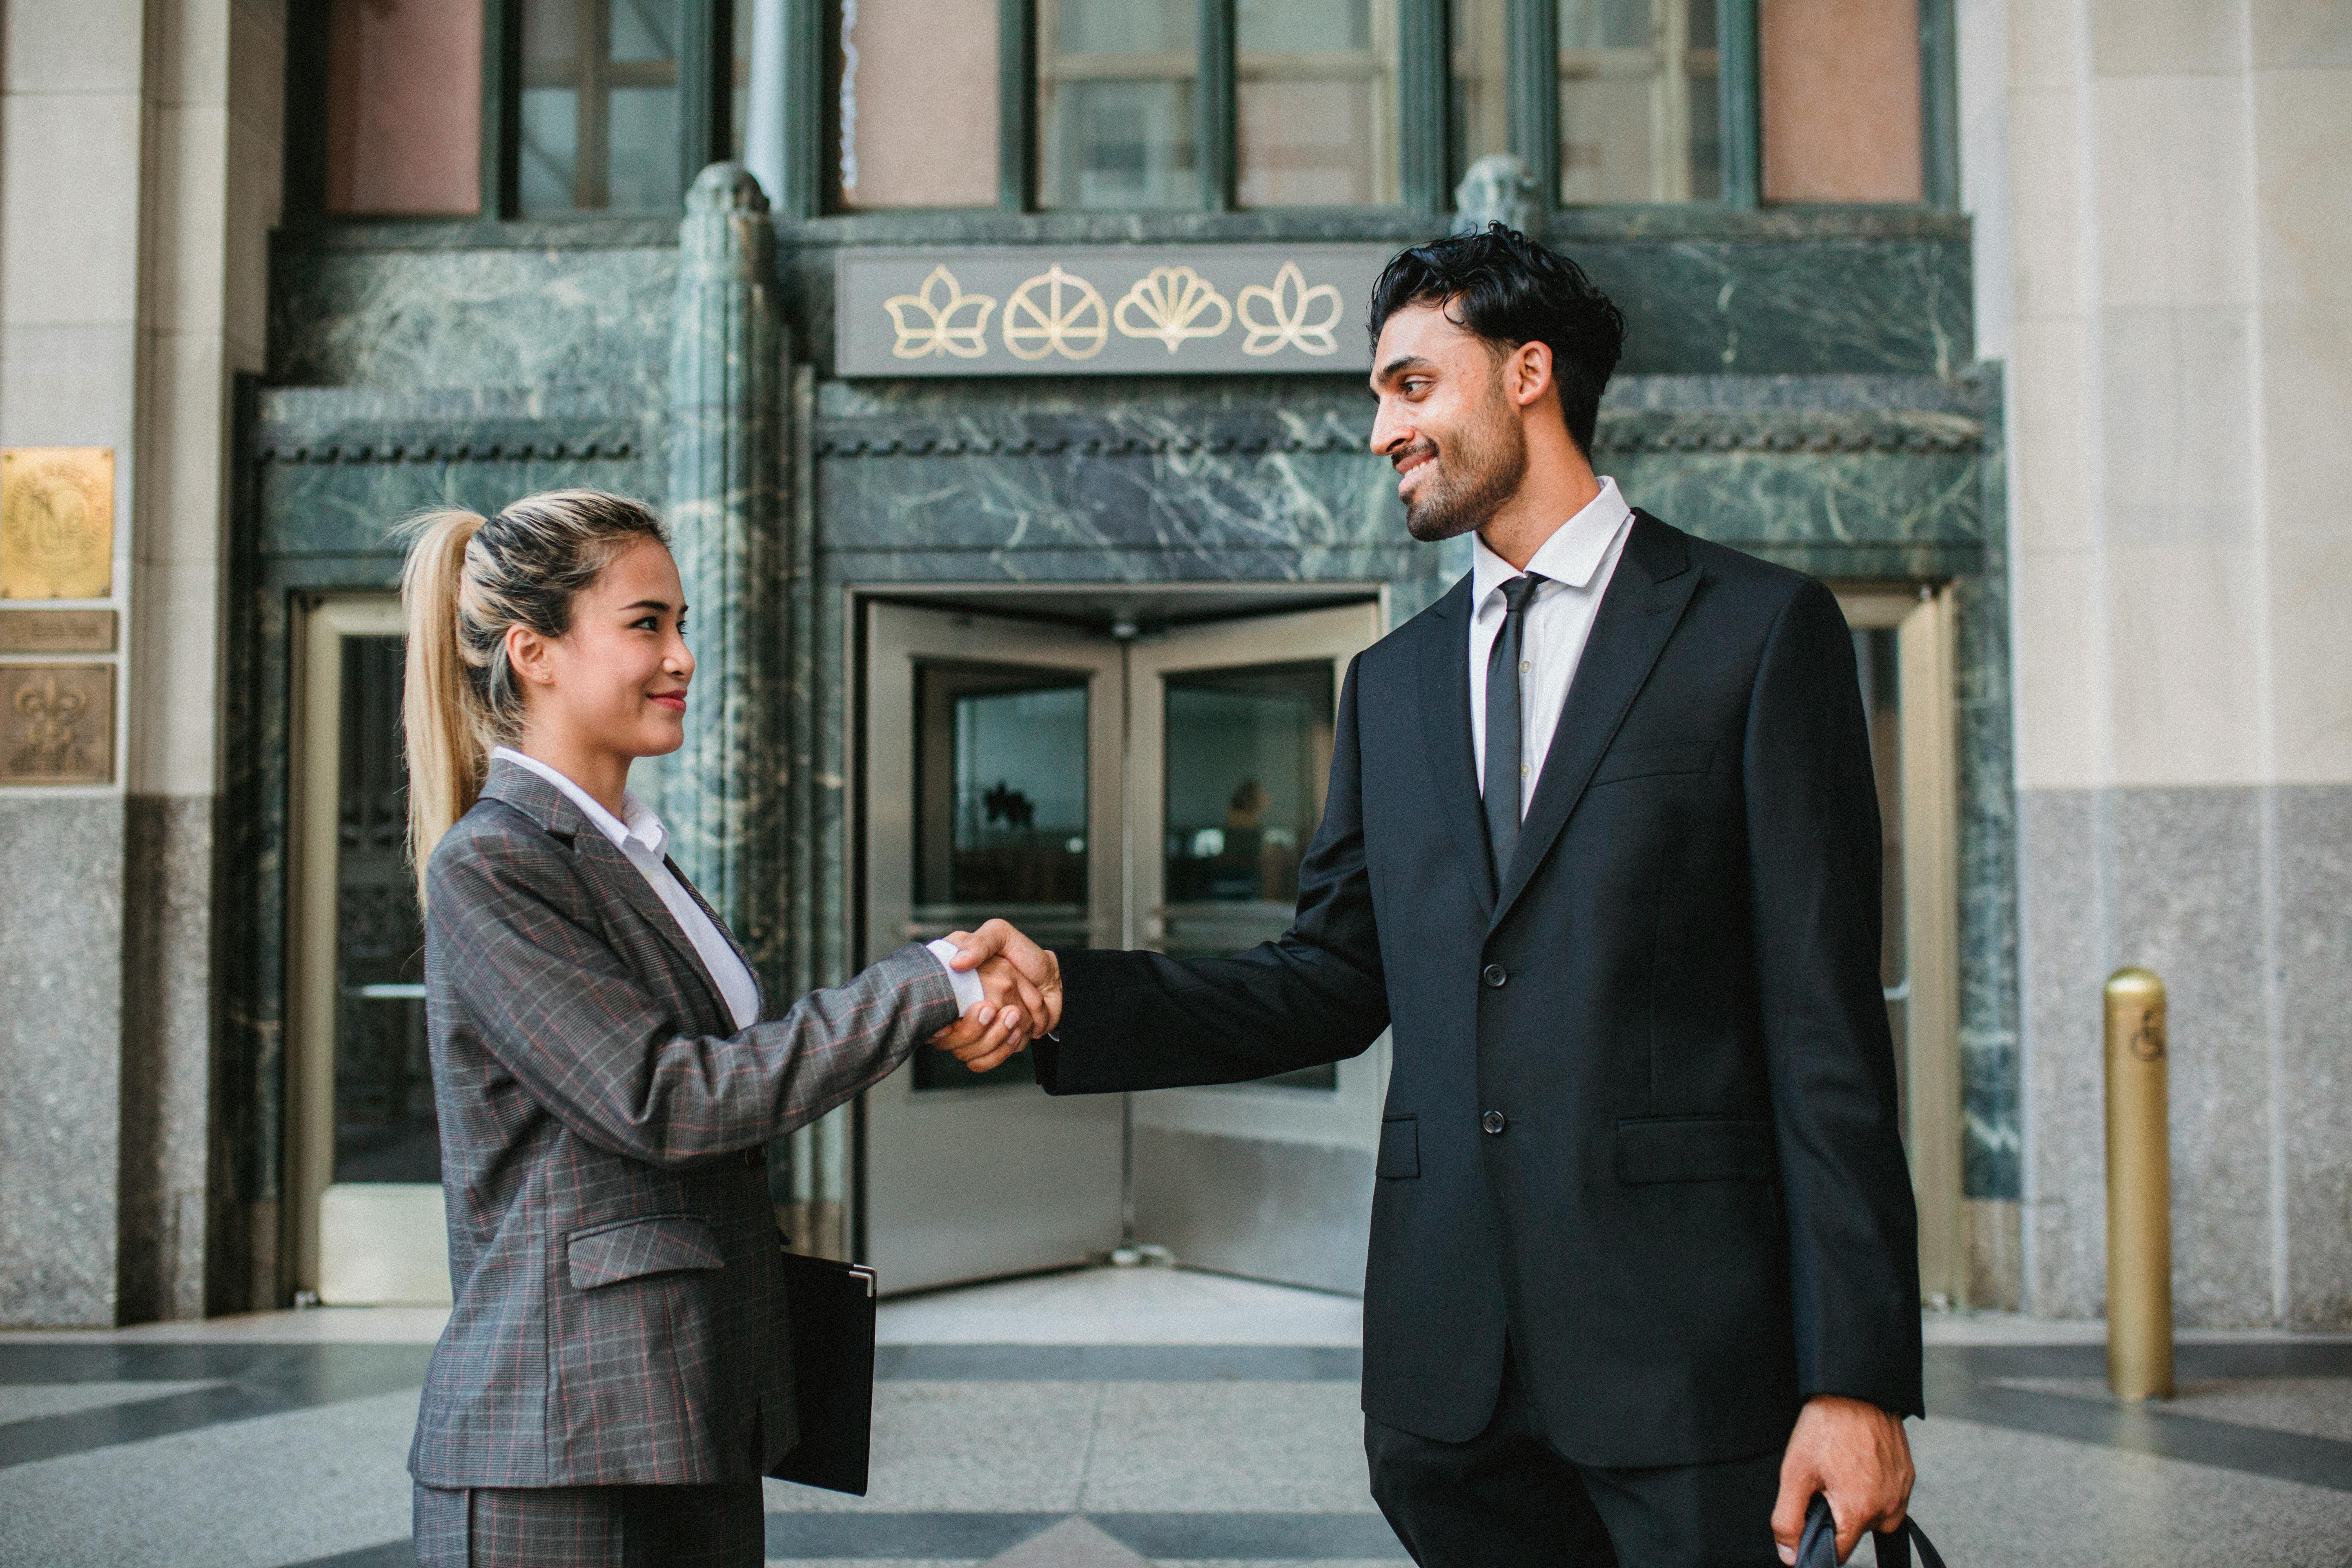 A businessman shaking a colleague's hand | Source: Pexels